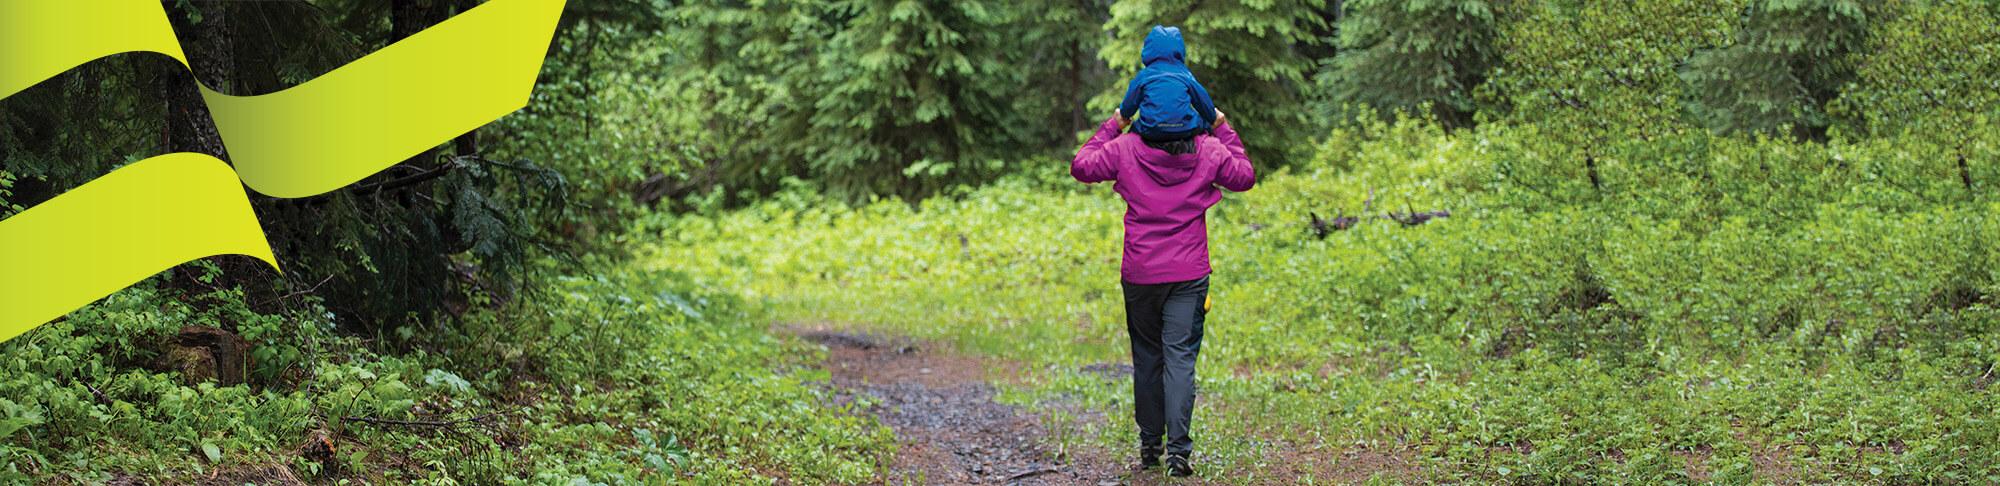 Woman and child hiking - Alectra Utilities Desktop Banner